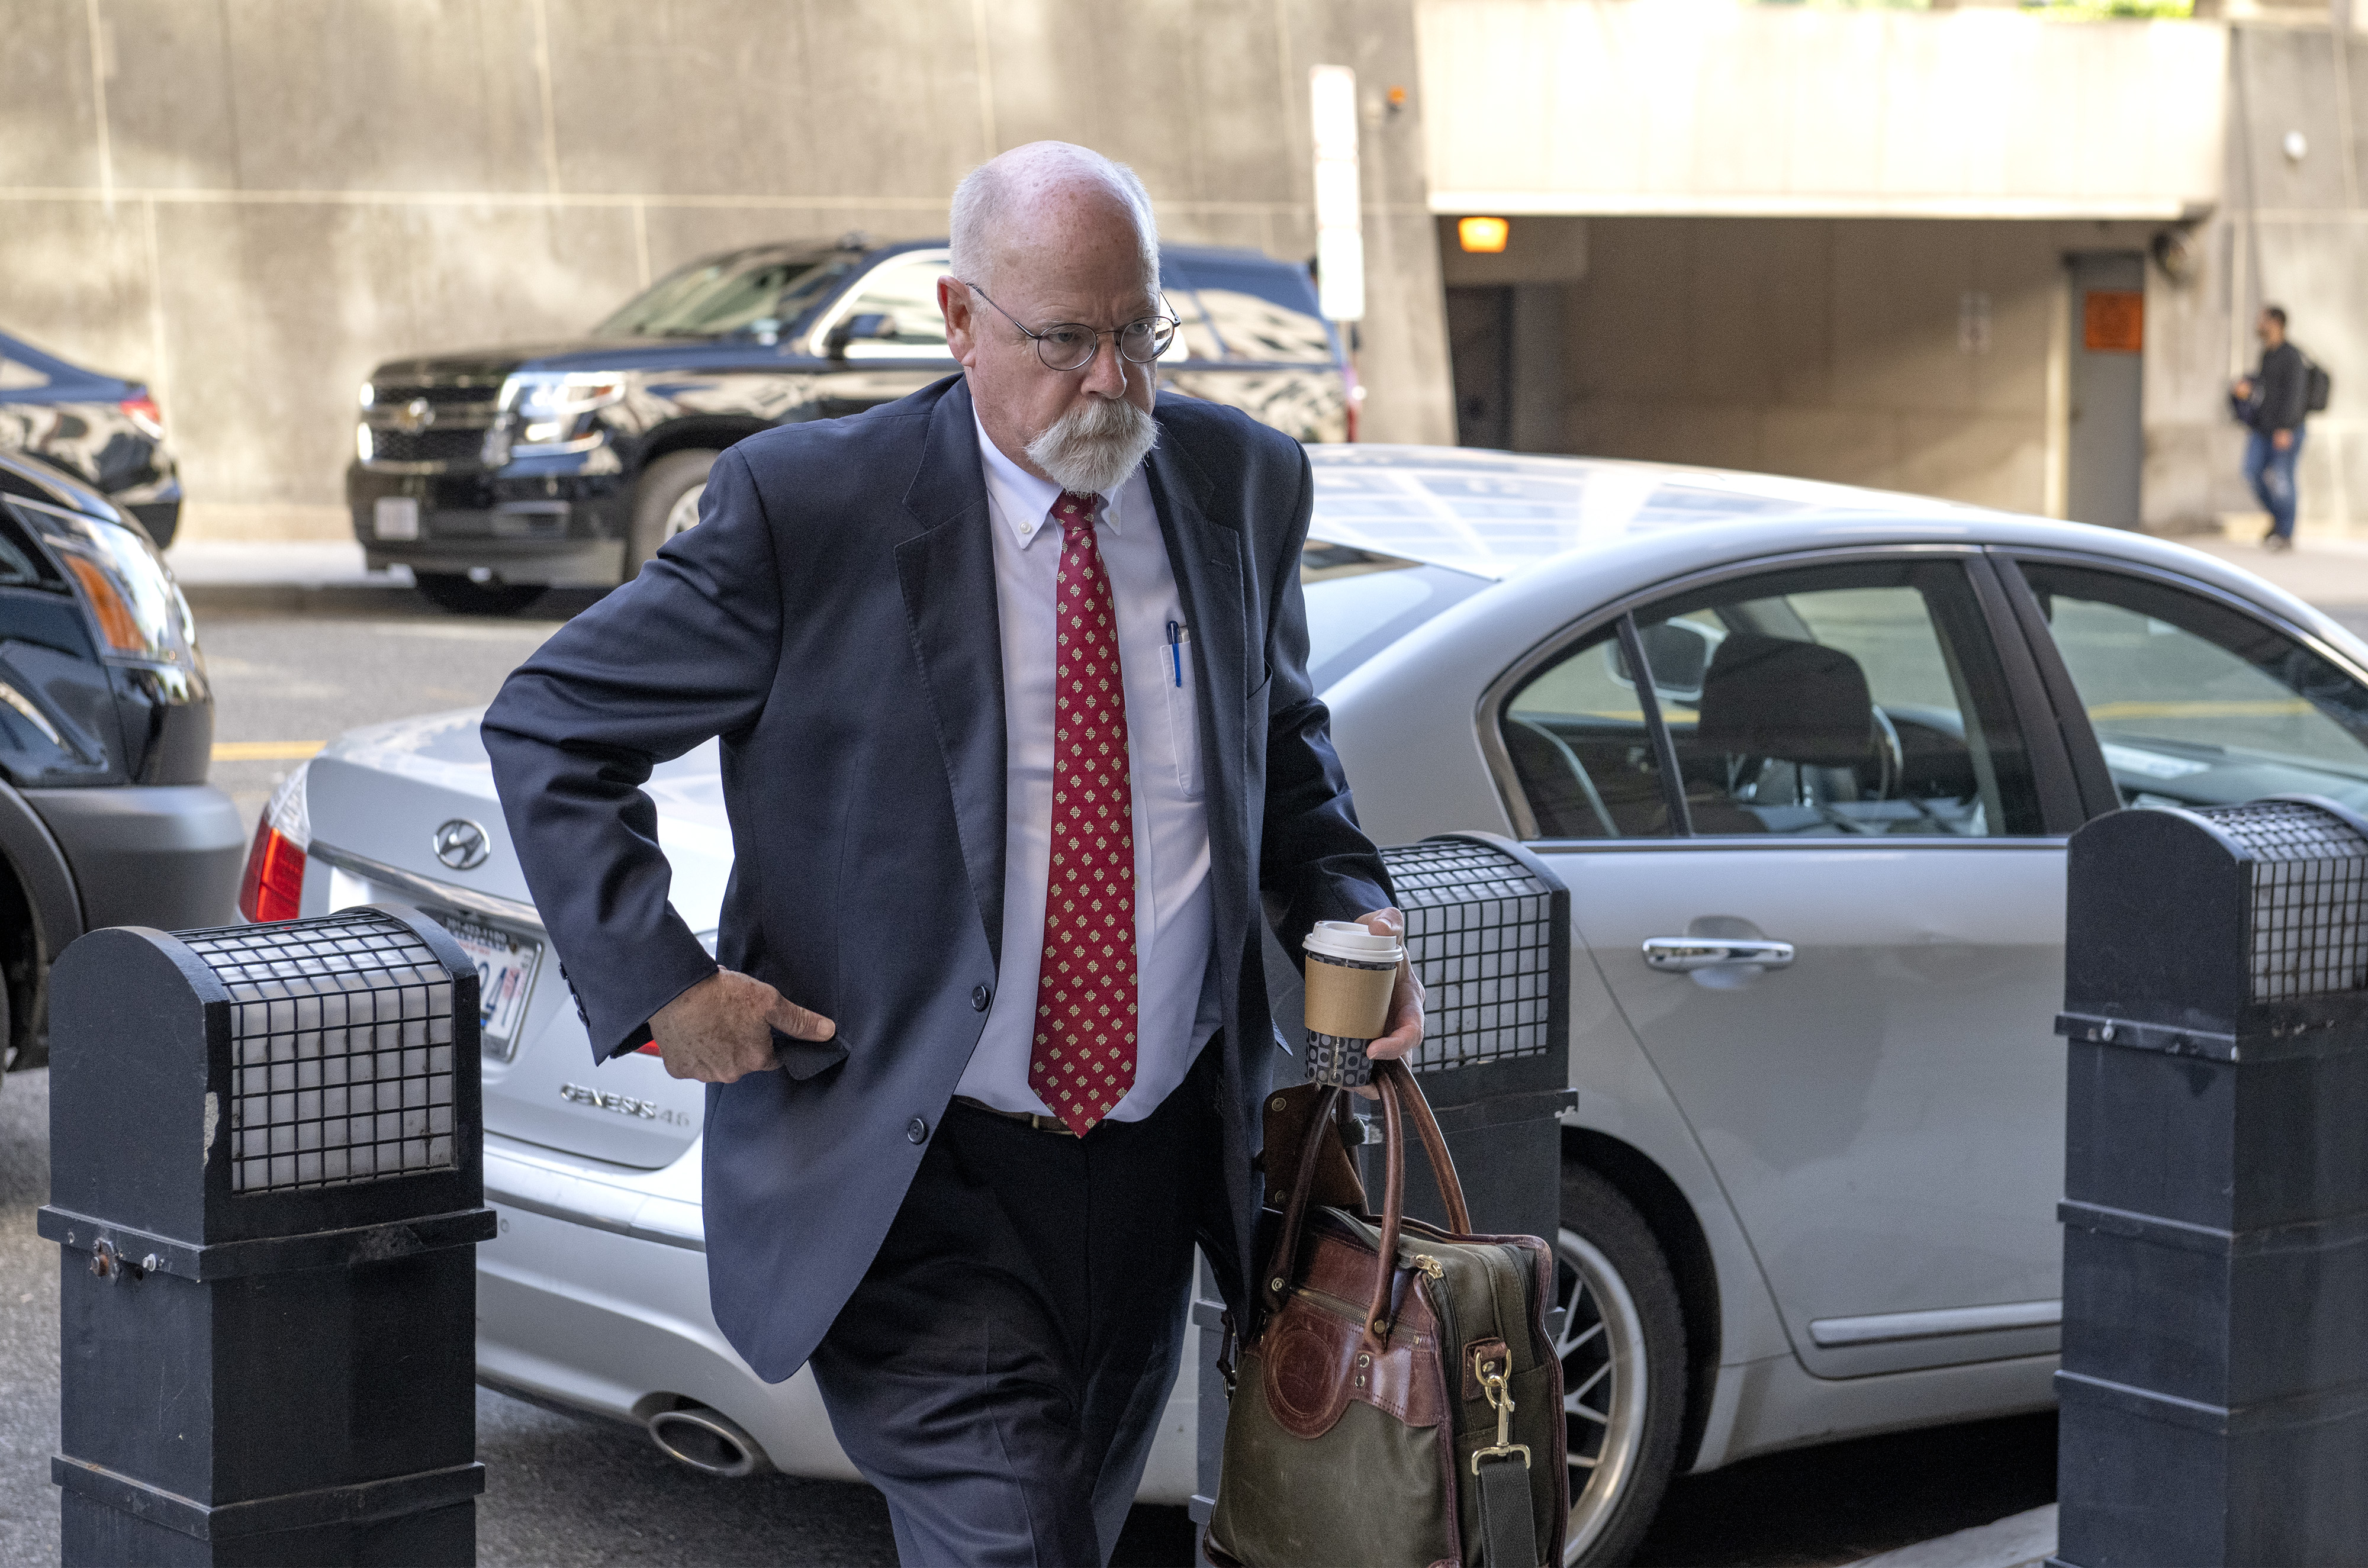 Special Counsel John Durham, who then-United States Attorney General William Barr appointed in 2019 after the release of the Mueller report to probe the origins of the Trump-Russia investigation, arrives for his trial at the United States District Court for the District of Columbia on May 17, 2022 in Washington, DC.